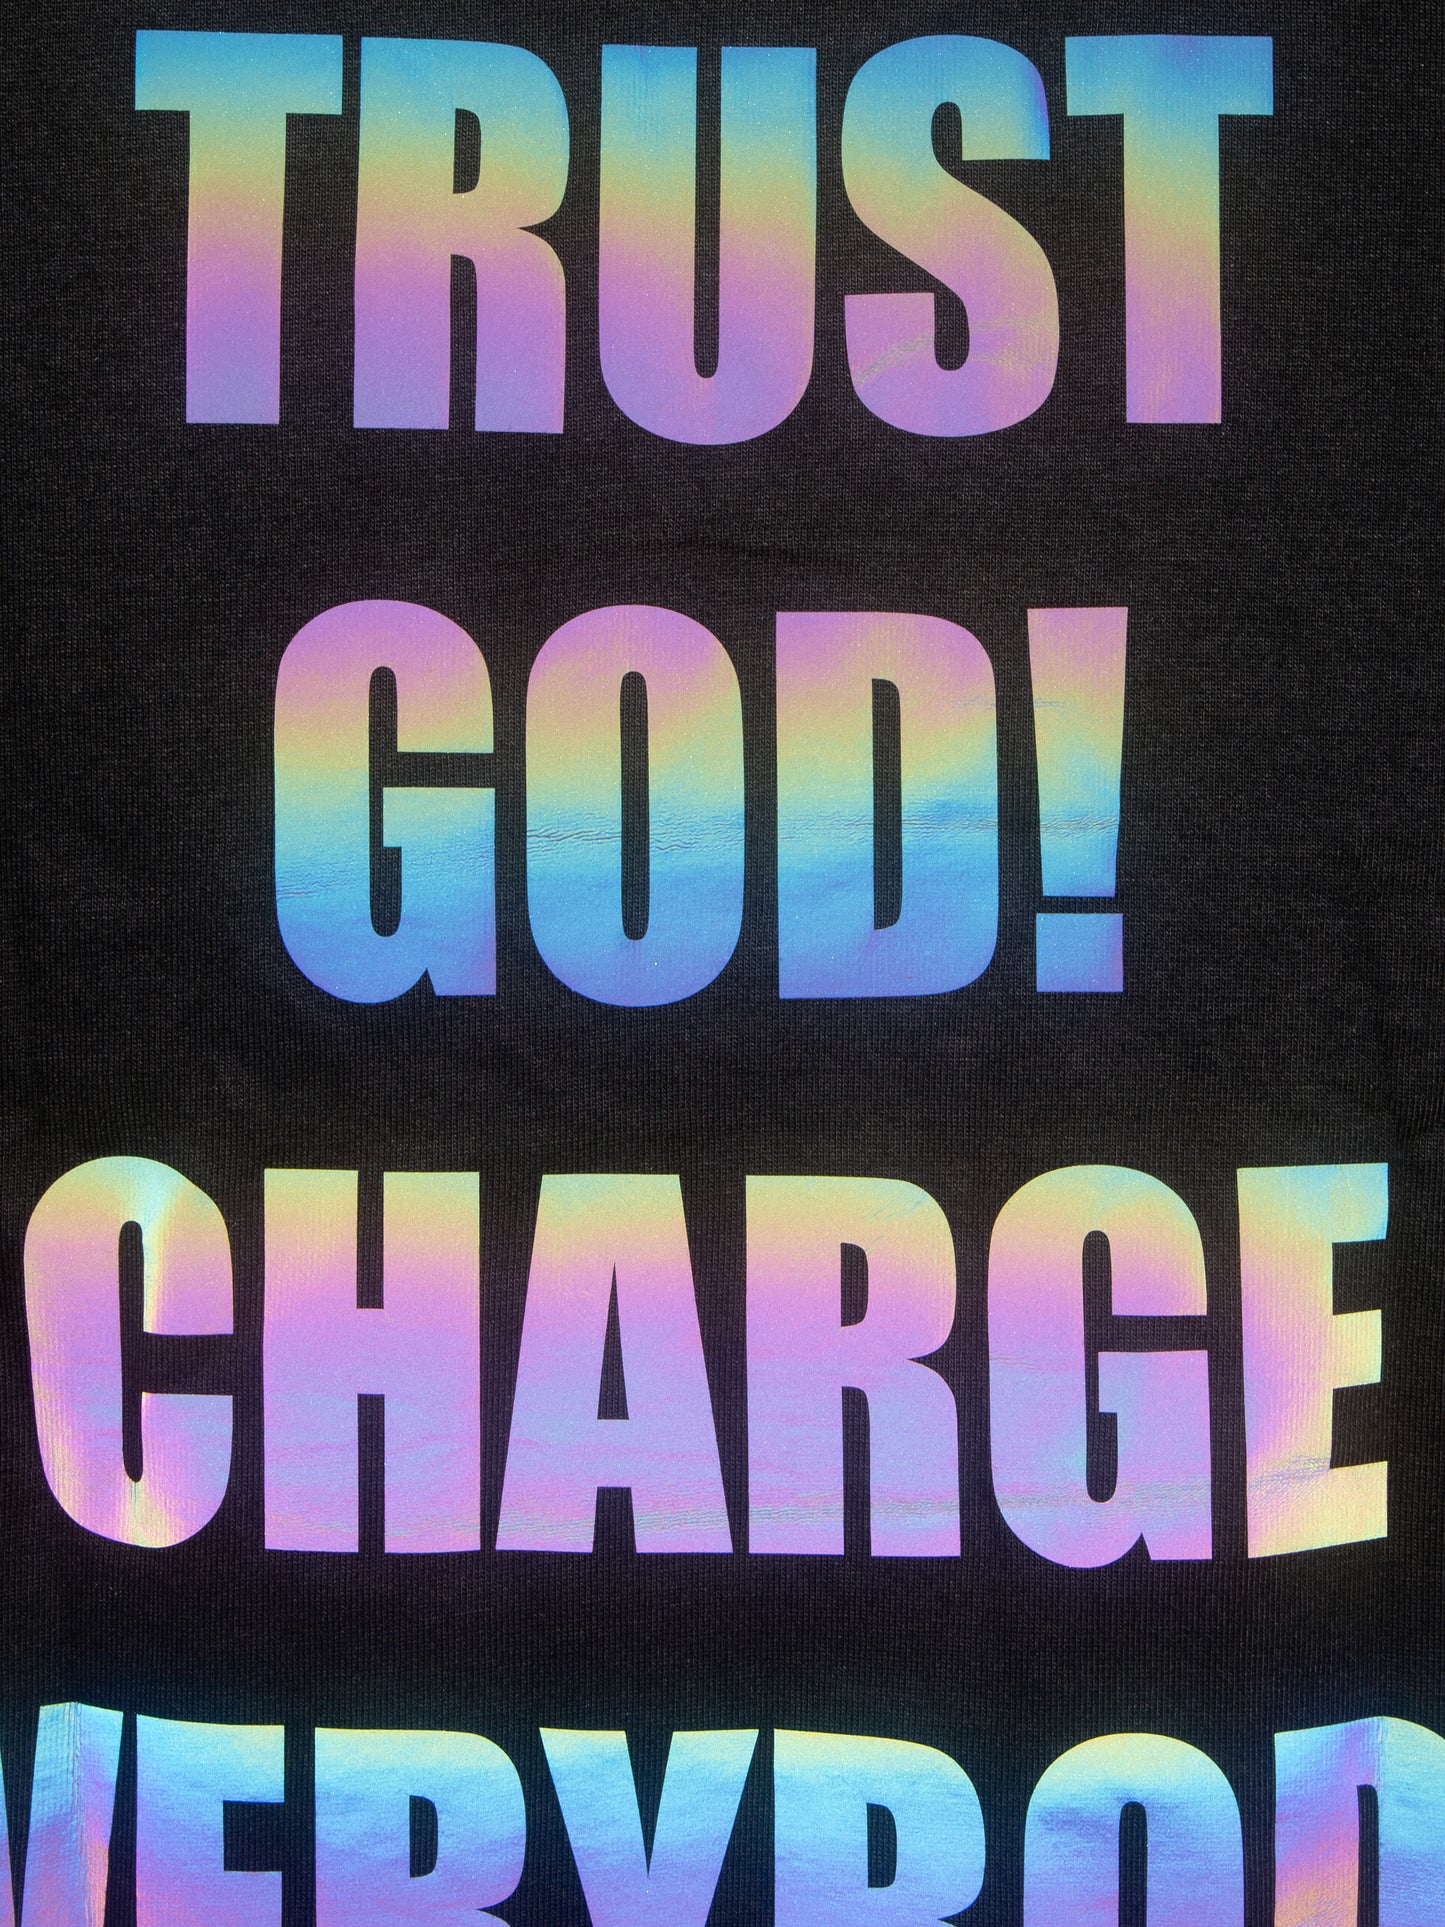 2024 Trust God! Charge Everybody Else! T-Shirt